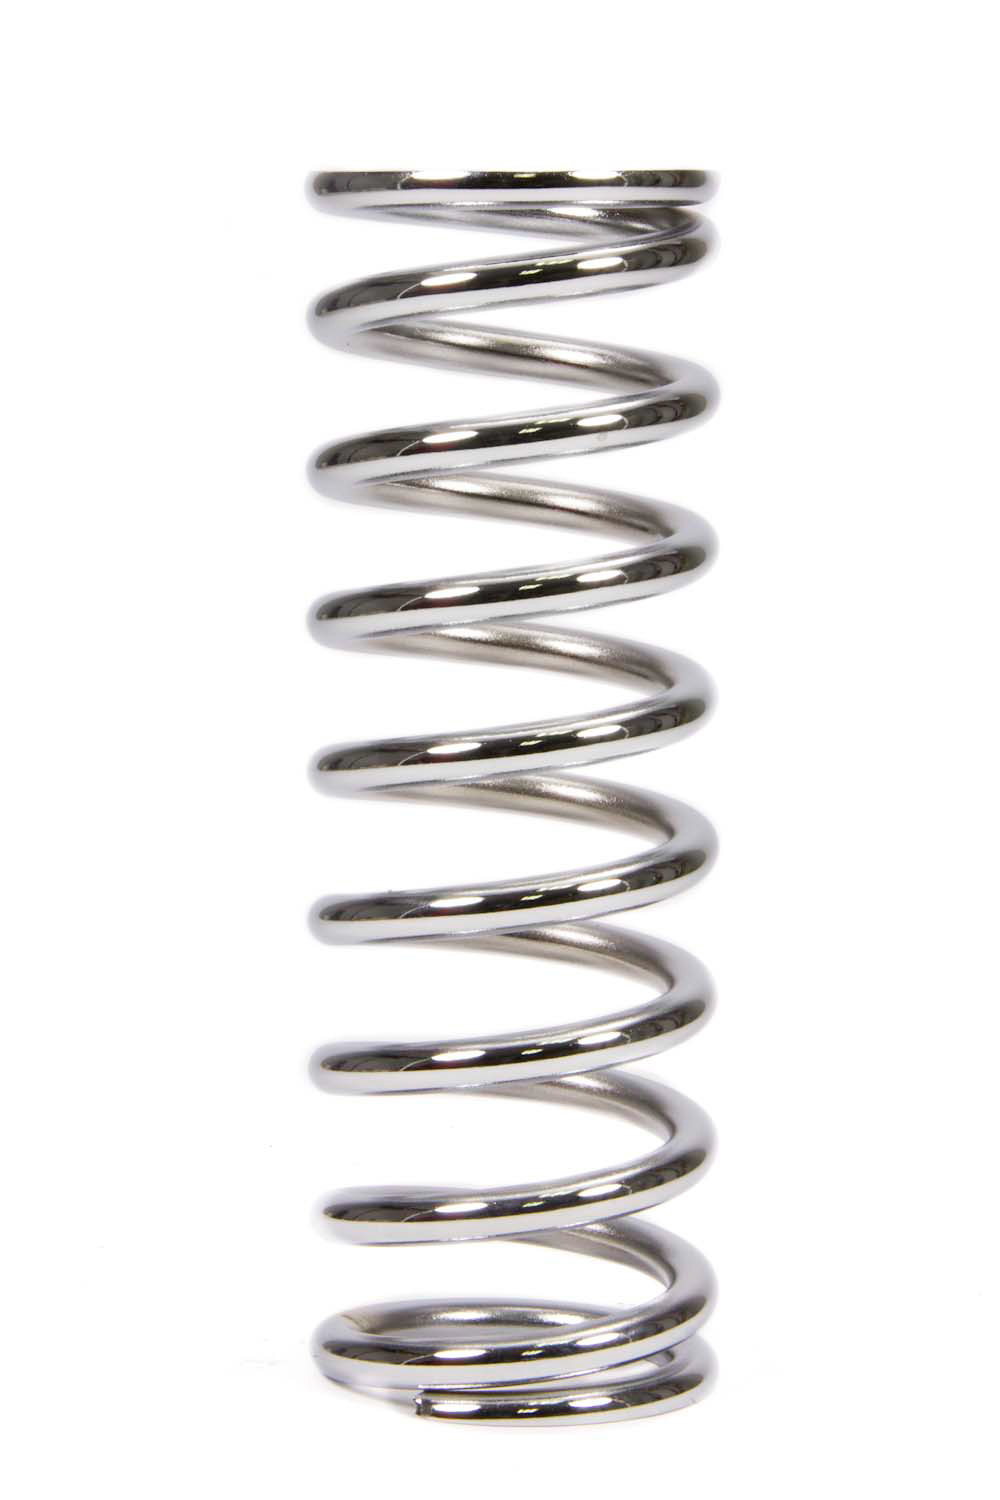 QA1 10CS250 Coil Spring, Coil-Over, 2.500 in ID, 10.000 in Length, 250 lb/in Spring Rate, Steel, Chrome, Each